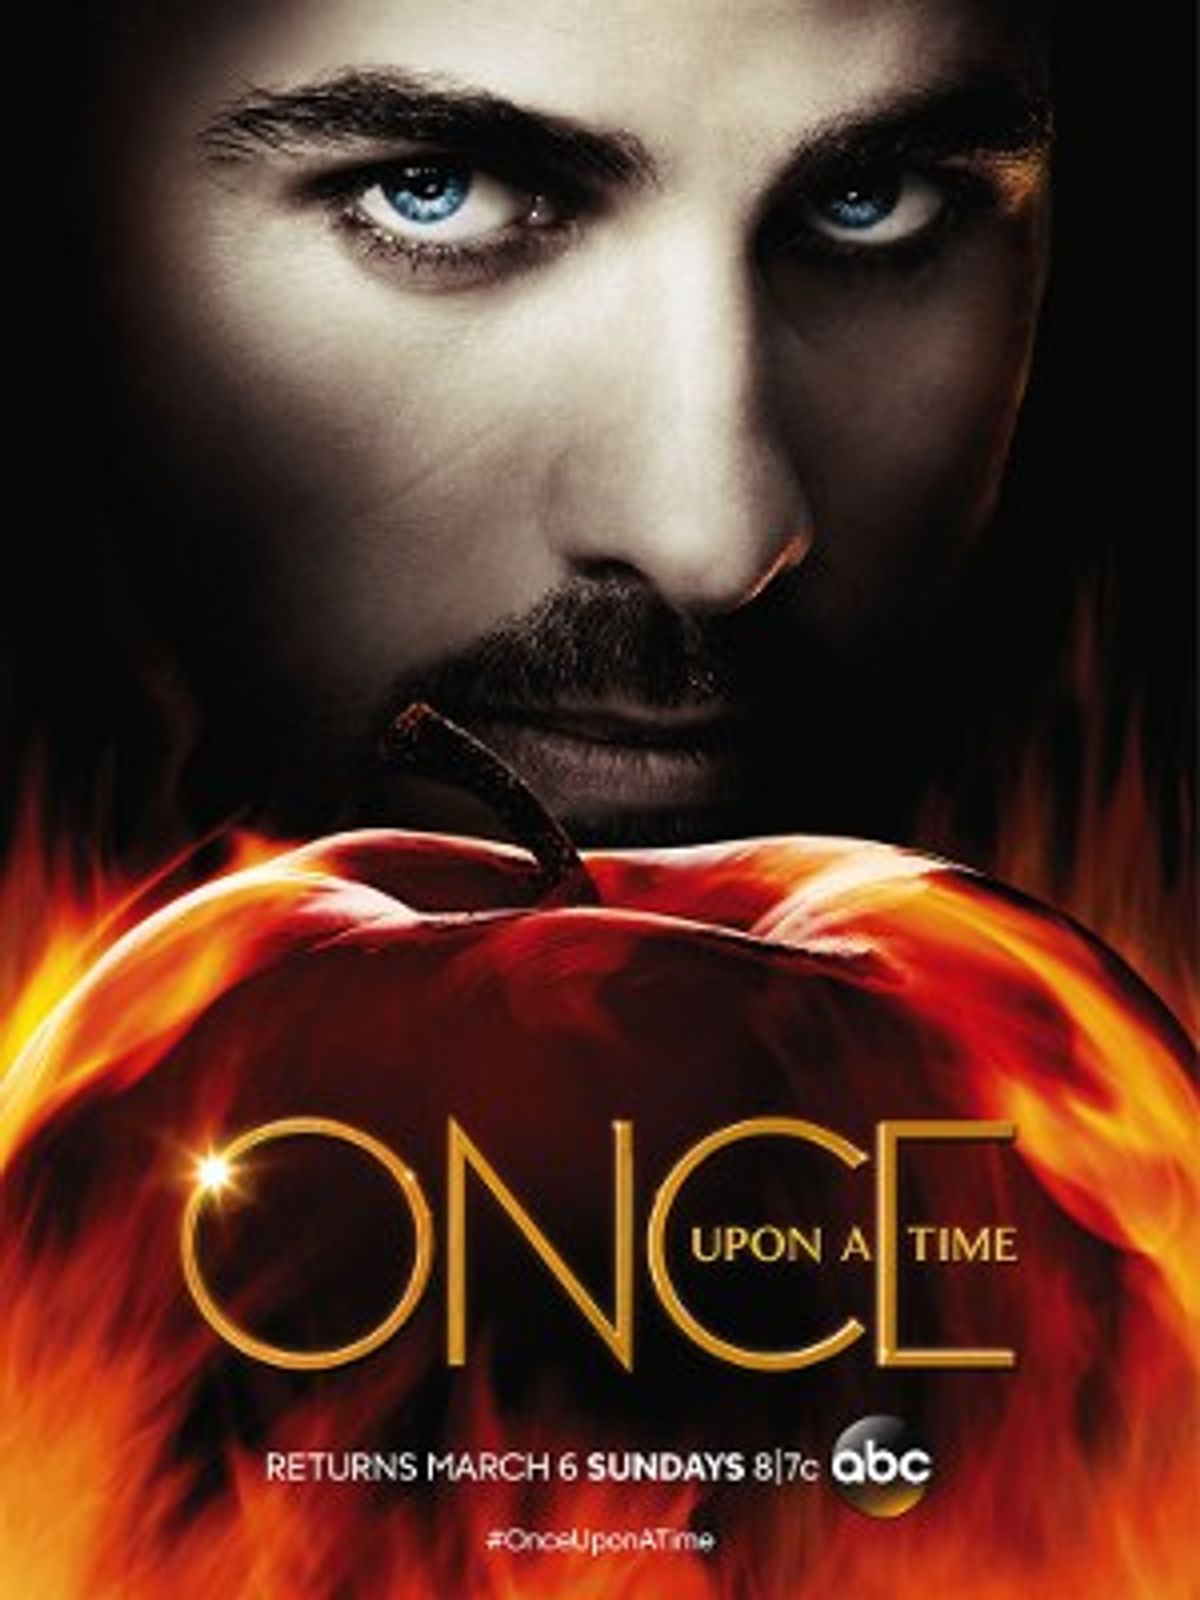 What All Oncers Are Dying To See With The Return Of 'Once Upon A Time' Season 5